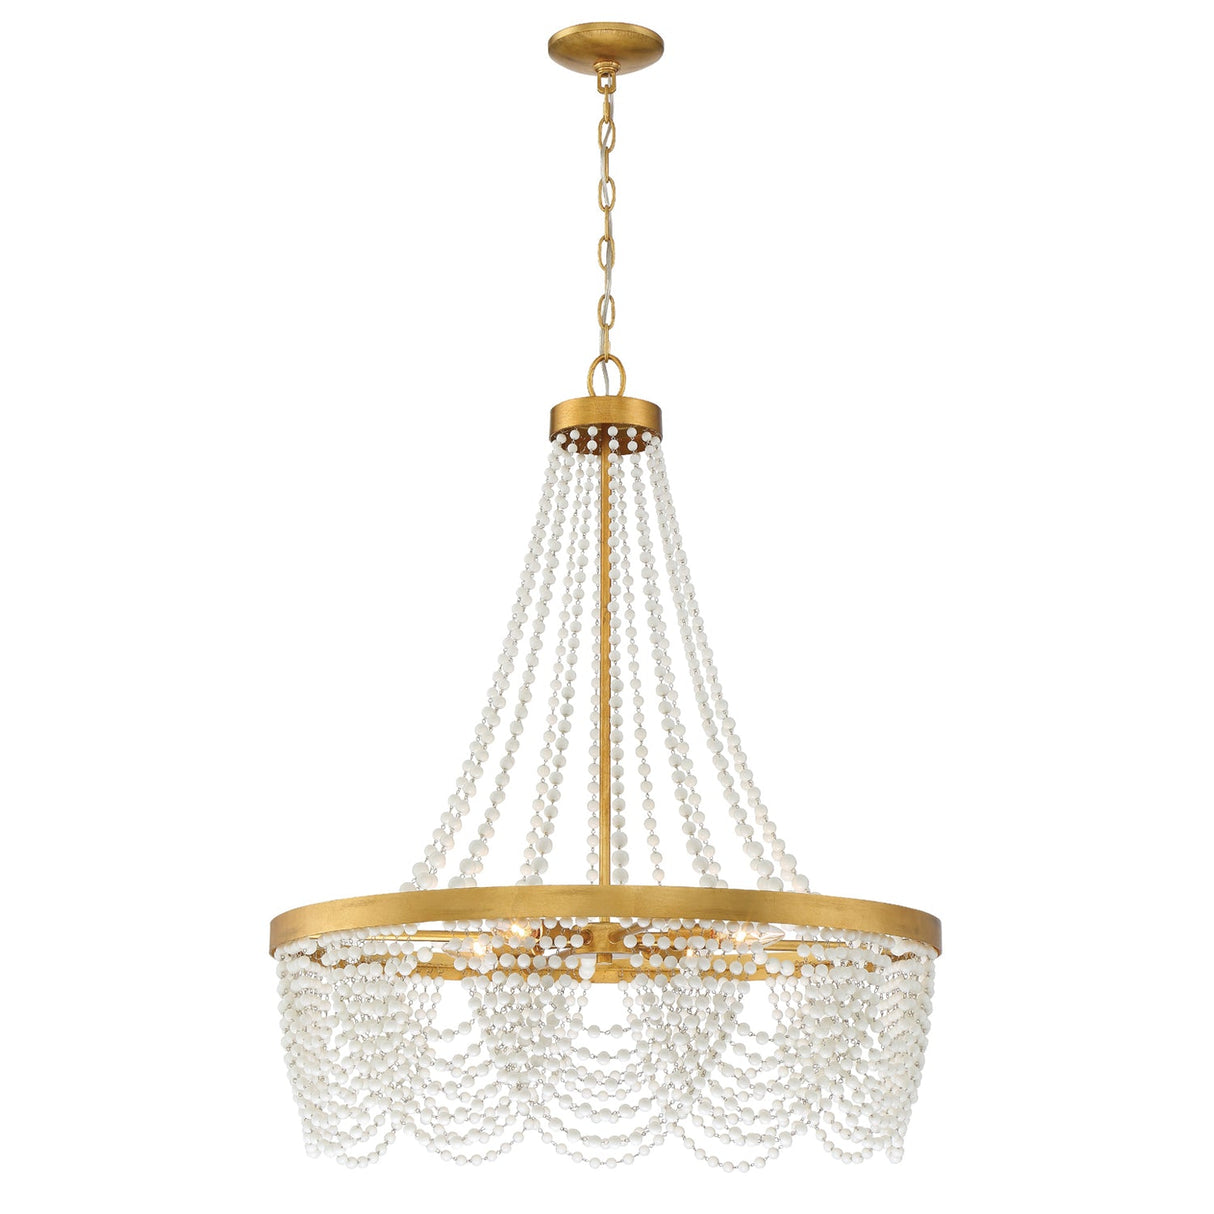 Fiona 4 Light Antique Gold Chandelier with White Beads FIO-A9104-GA-WH